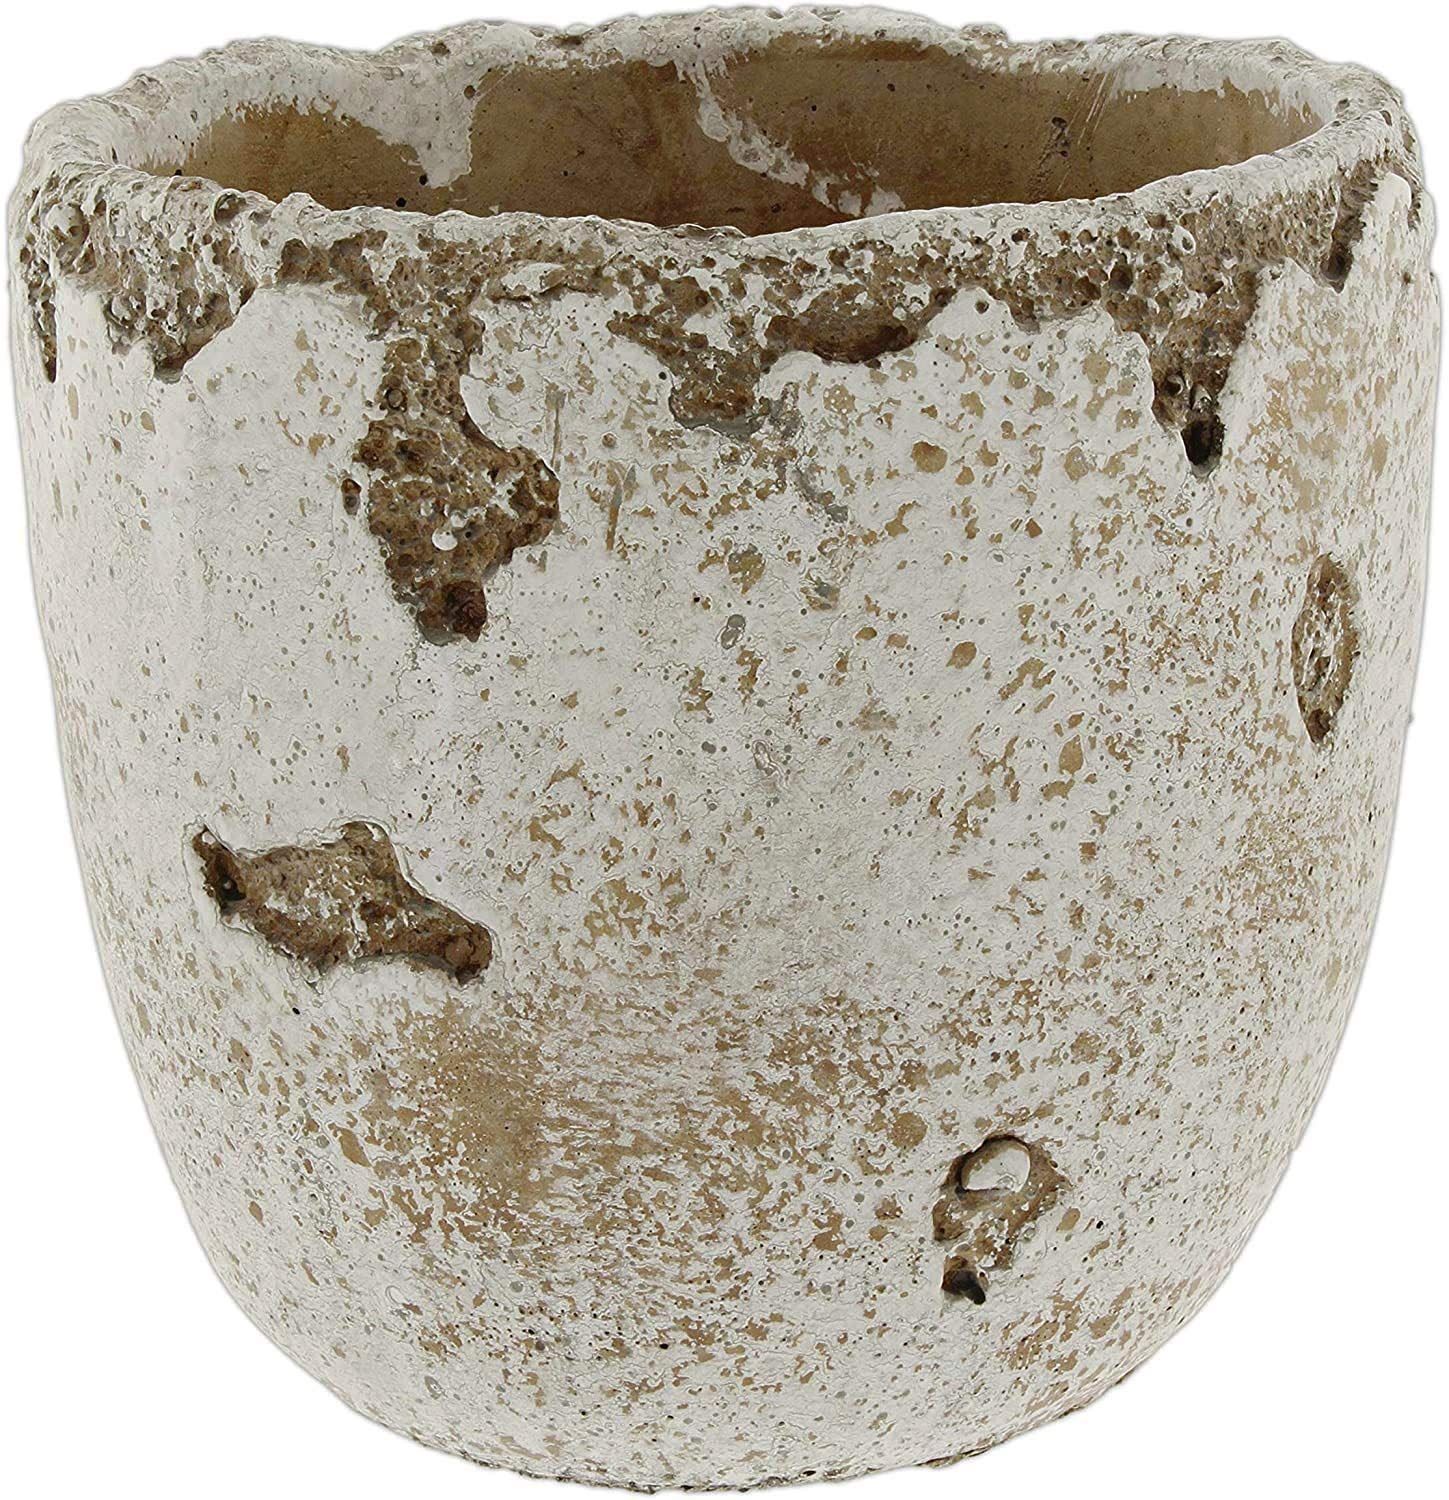 Distressed Weathered Cement Planter, 5 Inches - Unique Stone Plant Pot for Indoor Outdoor Home Garden Decor | Amazon (US)